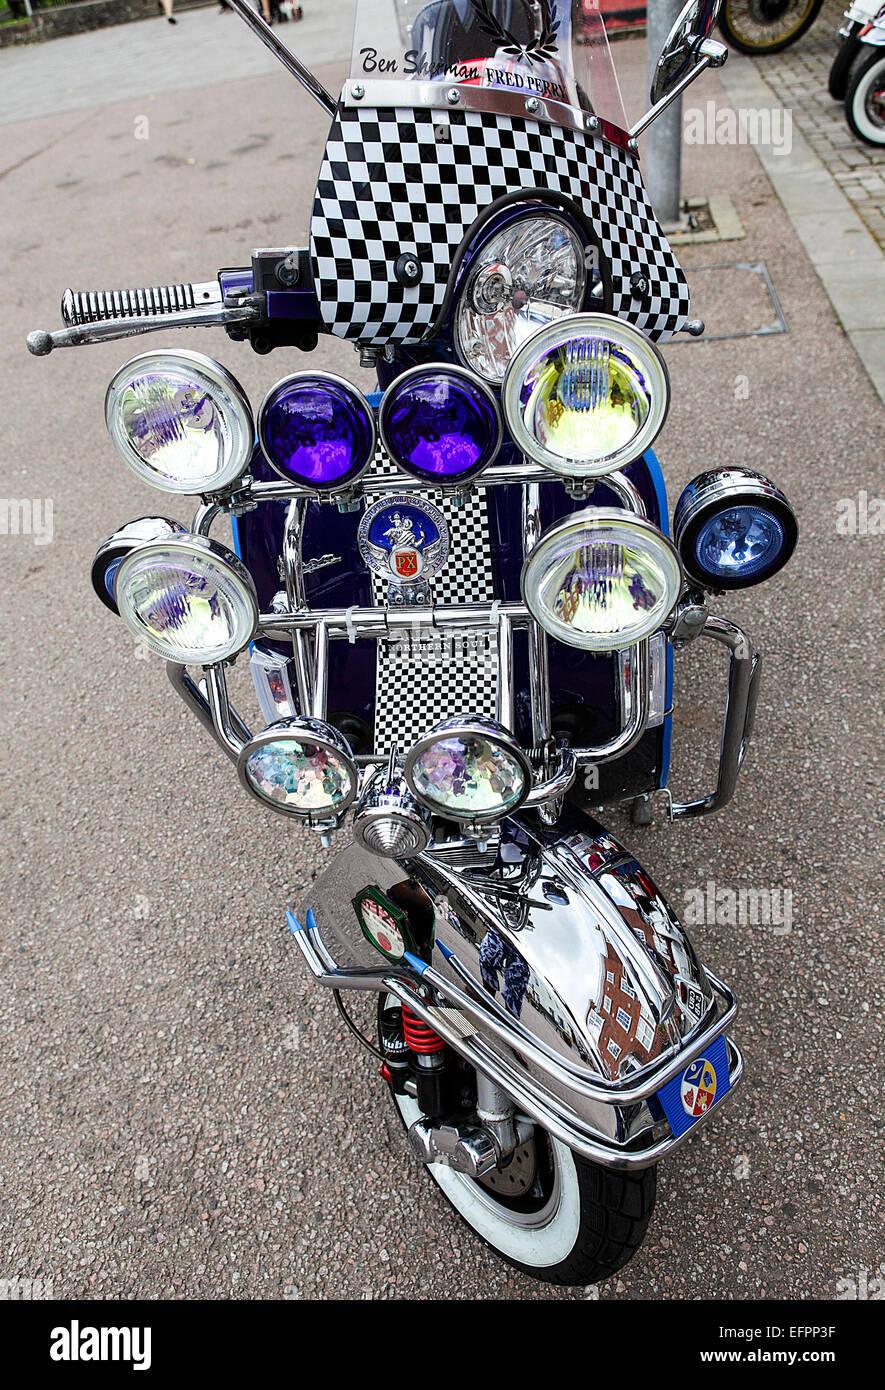 Customized scooters, seen here in close-up during a rally in the market square at Ludlow during the summer of 2014. Stock Photo